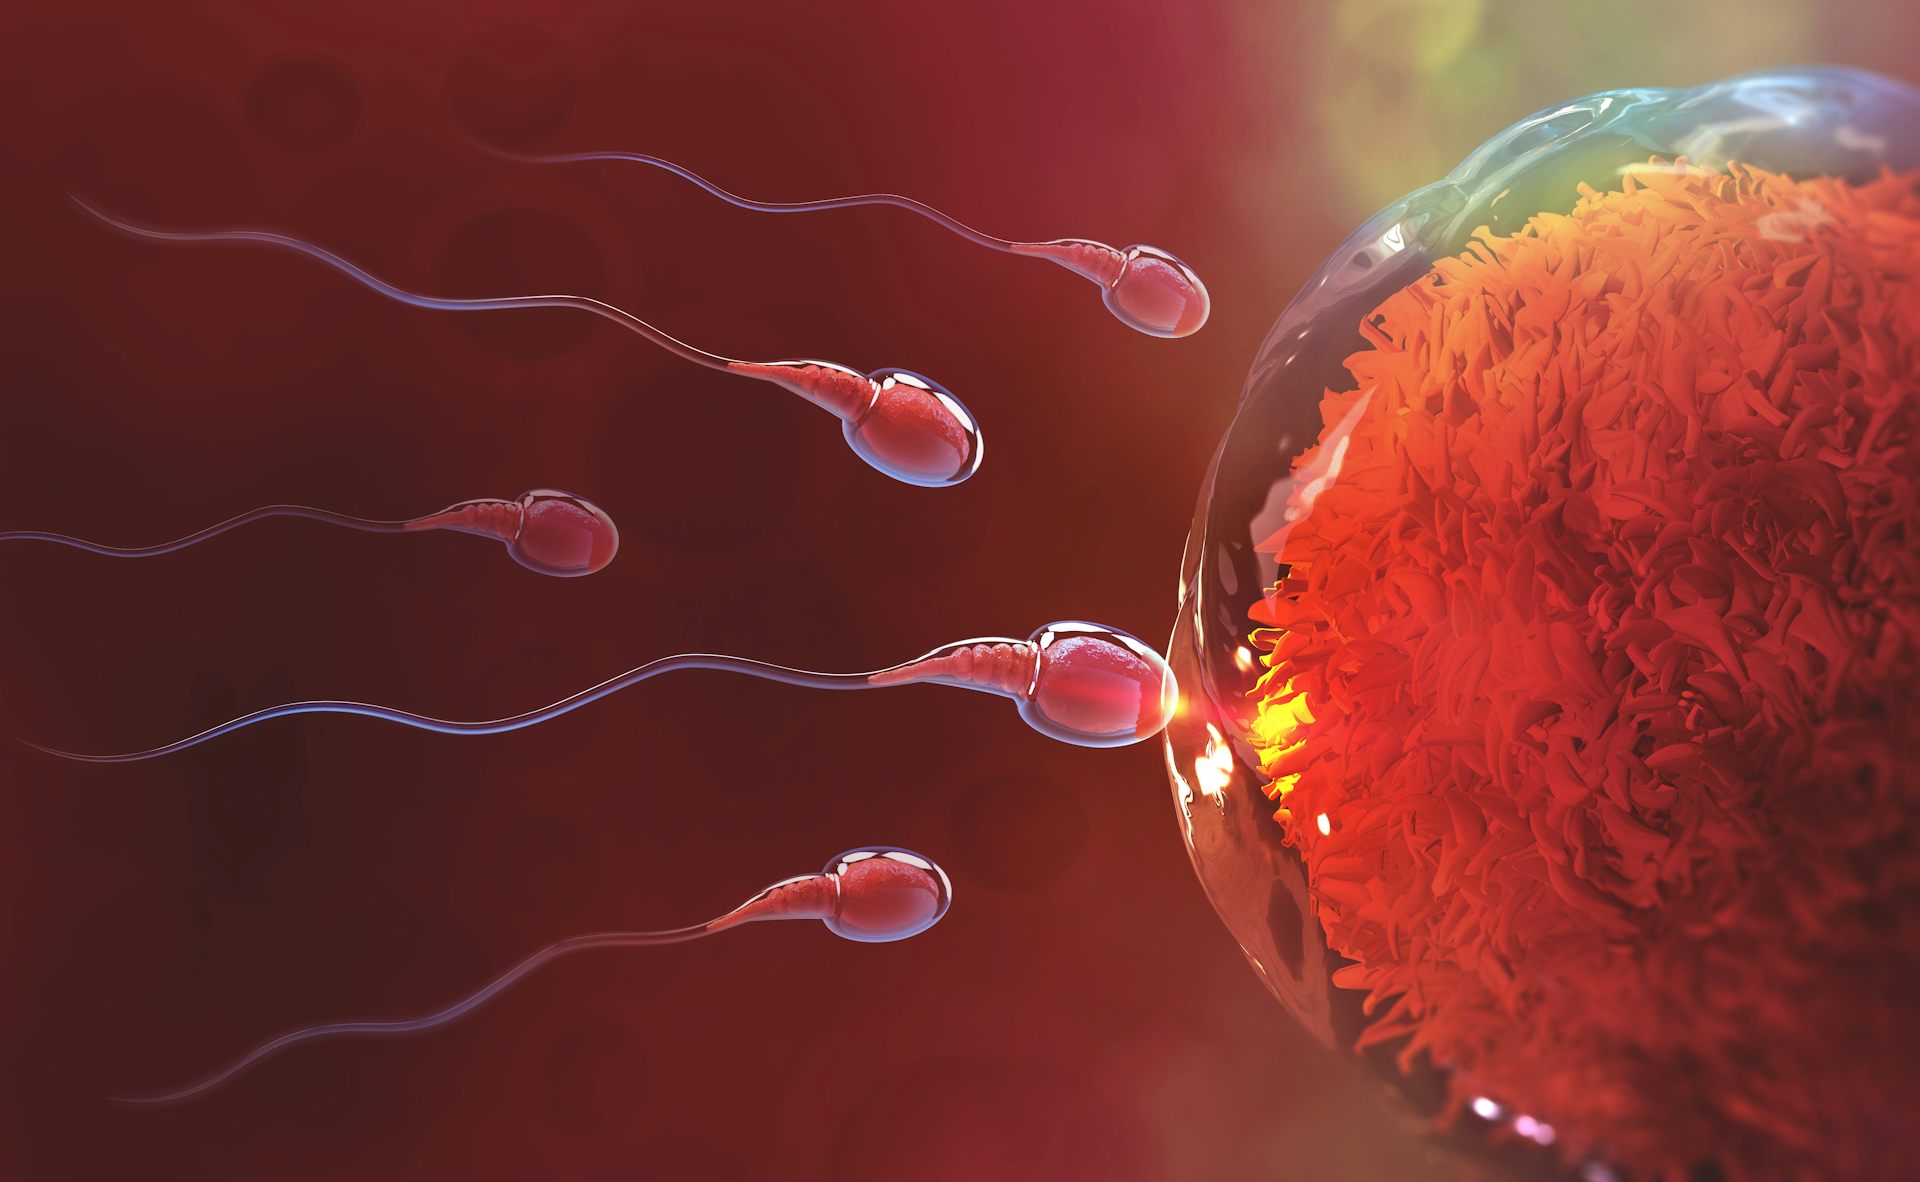 How we solved the mystery of the human sperm tail image